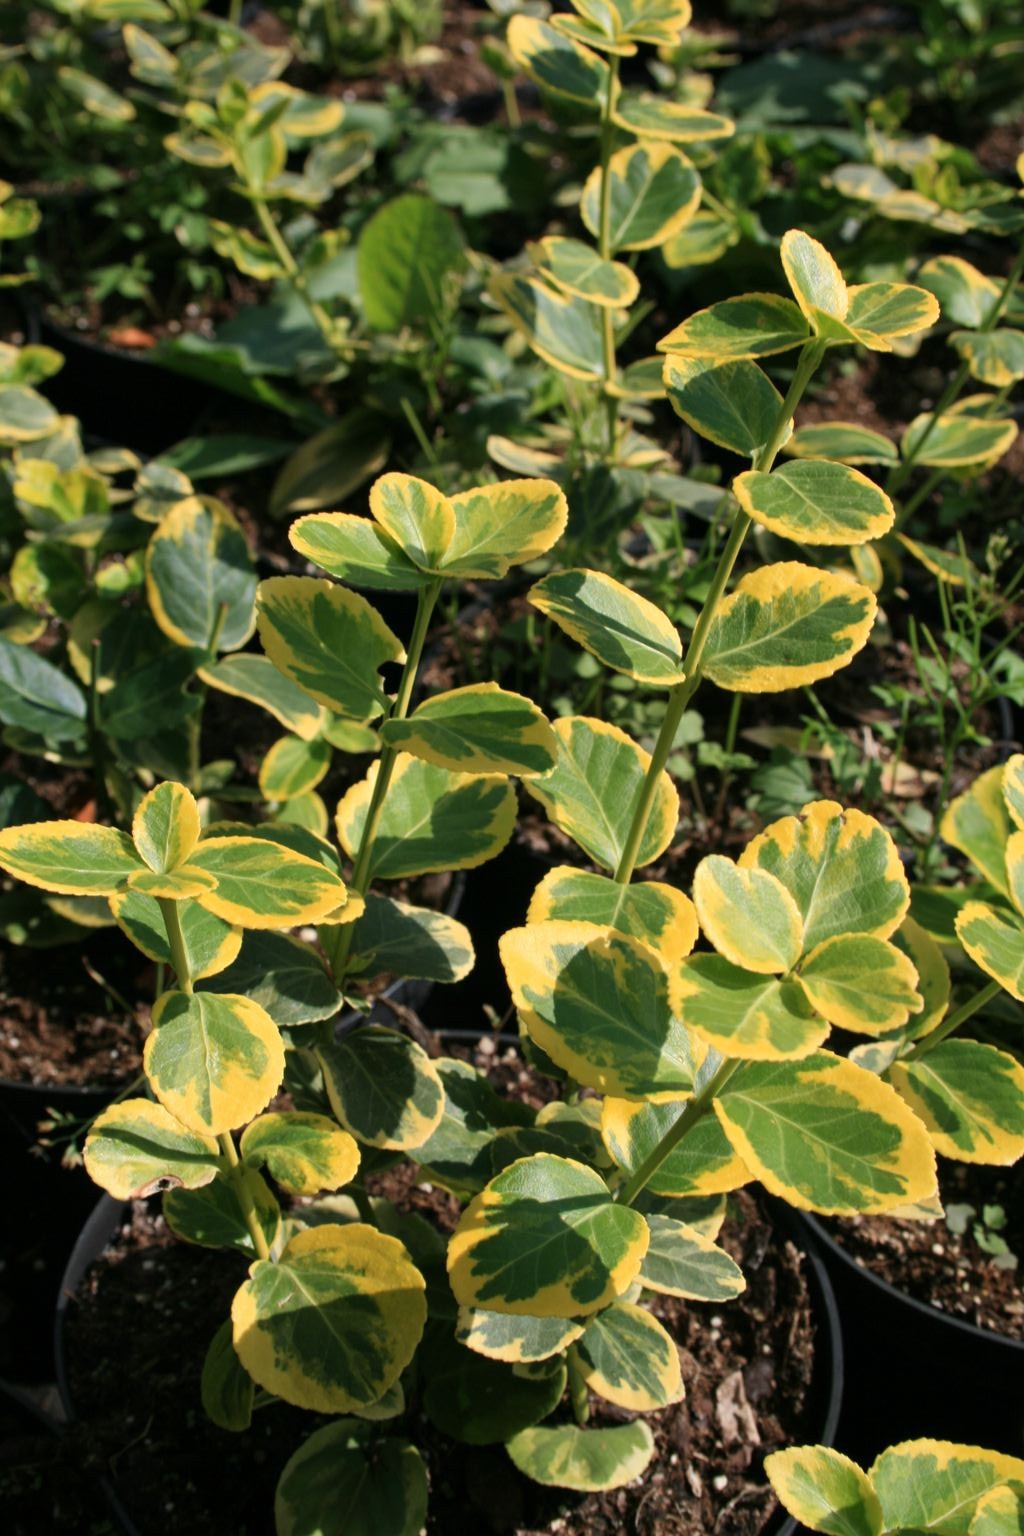 Trzmielina Fortunea "Canadale Gold" / Euonymus fortunei "Canadale Gold"